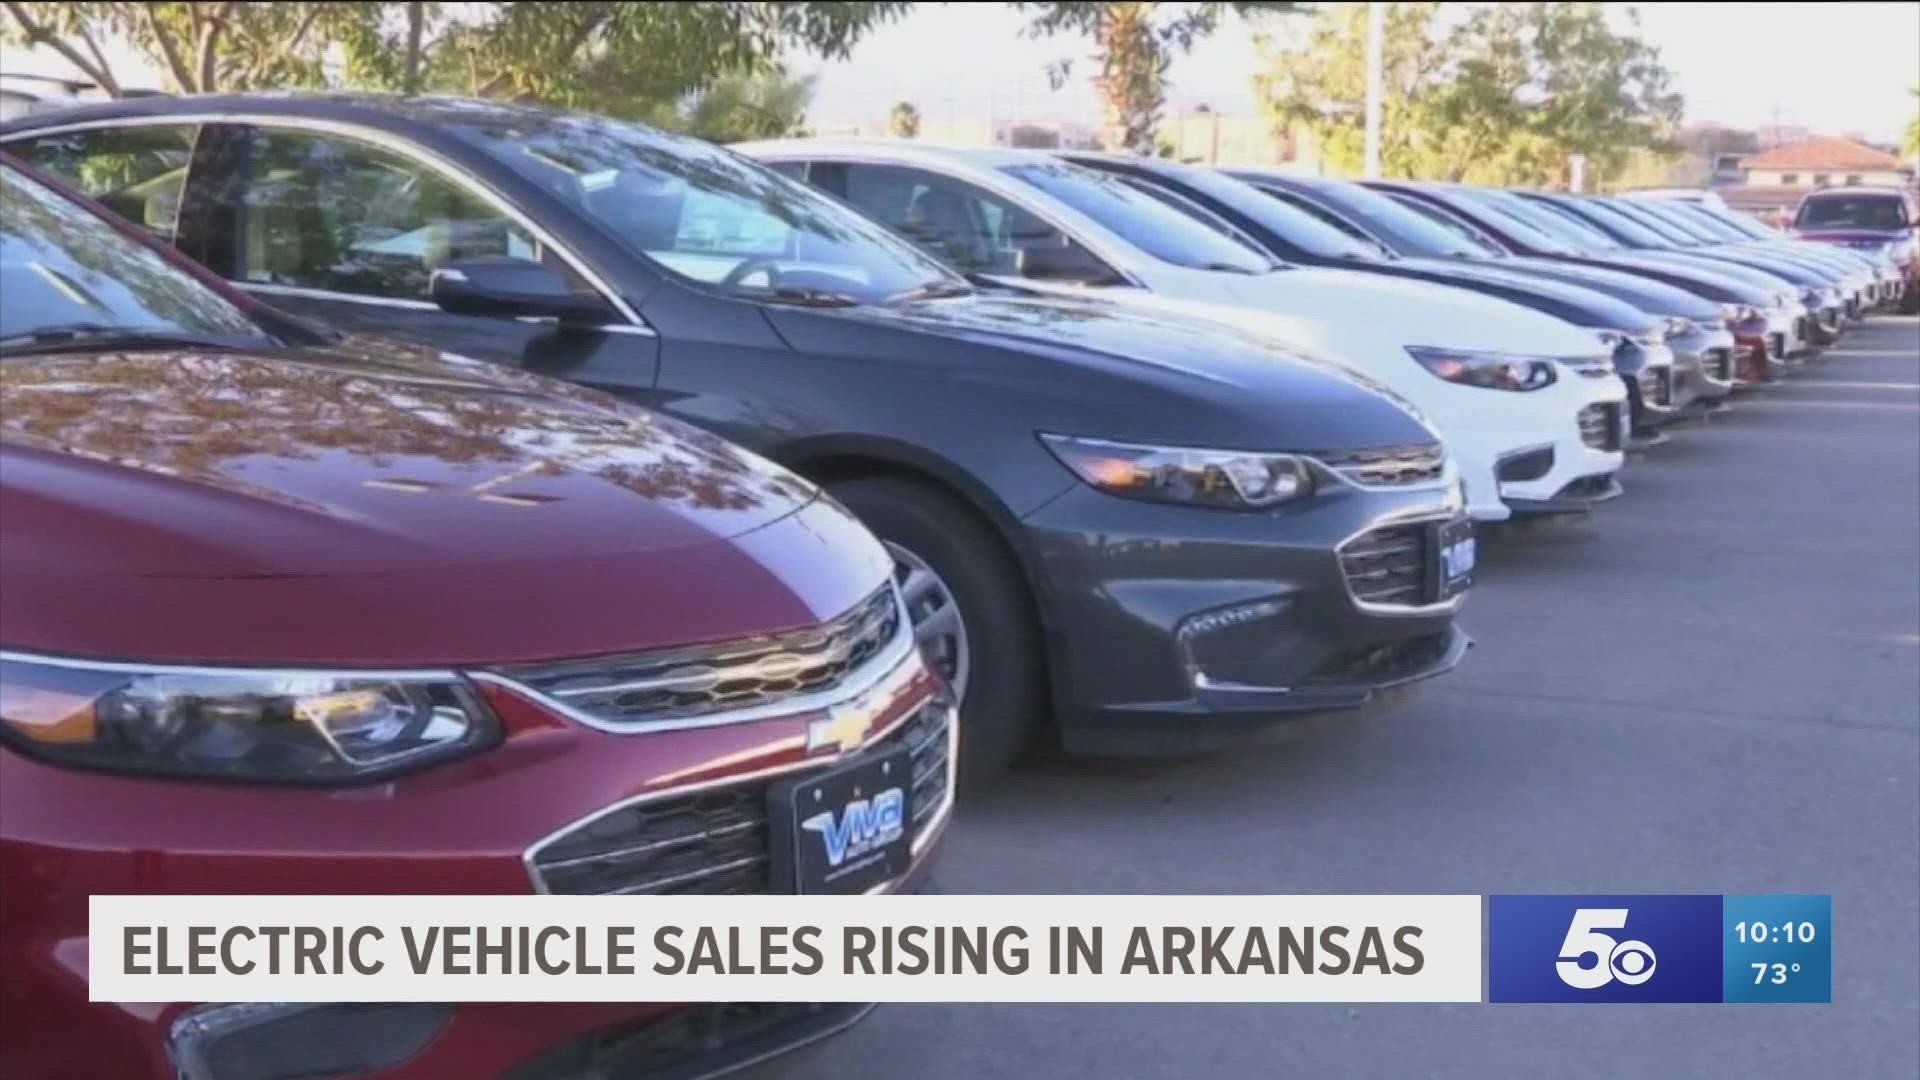 Out of the 75 counties in Arkansas, Benton county ranks number one with 670 fully electric vehicles, and Washington County ranks third with 400 electric cars.